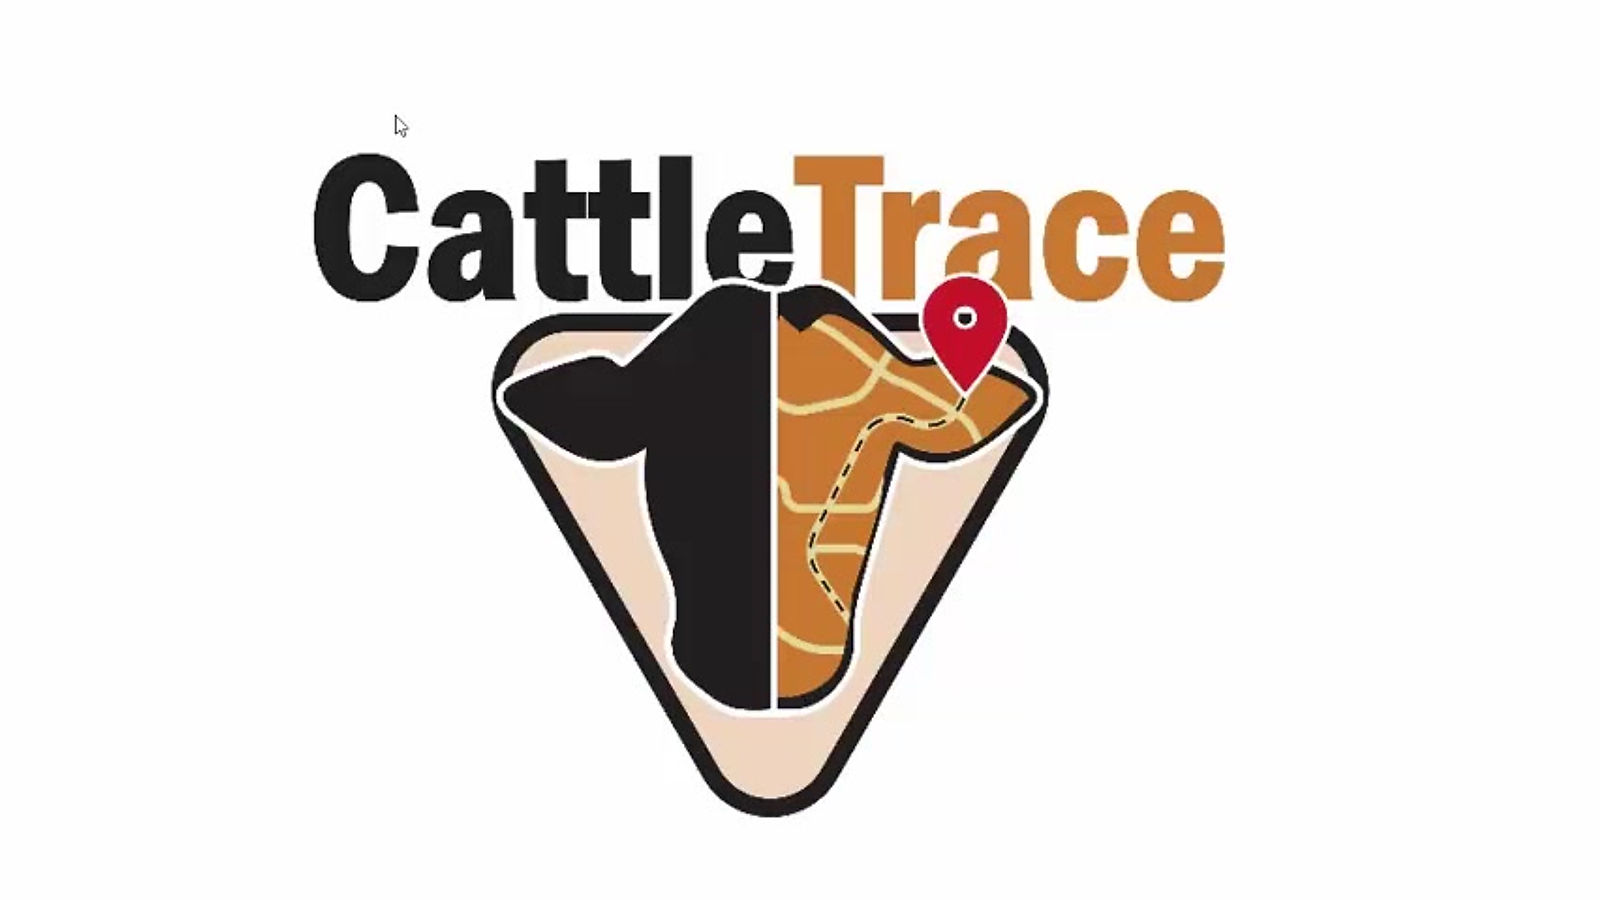 CattleTrace Welcome and Overview